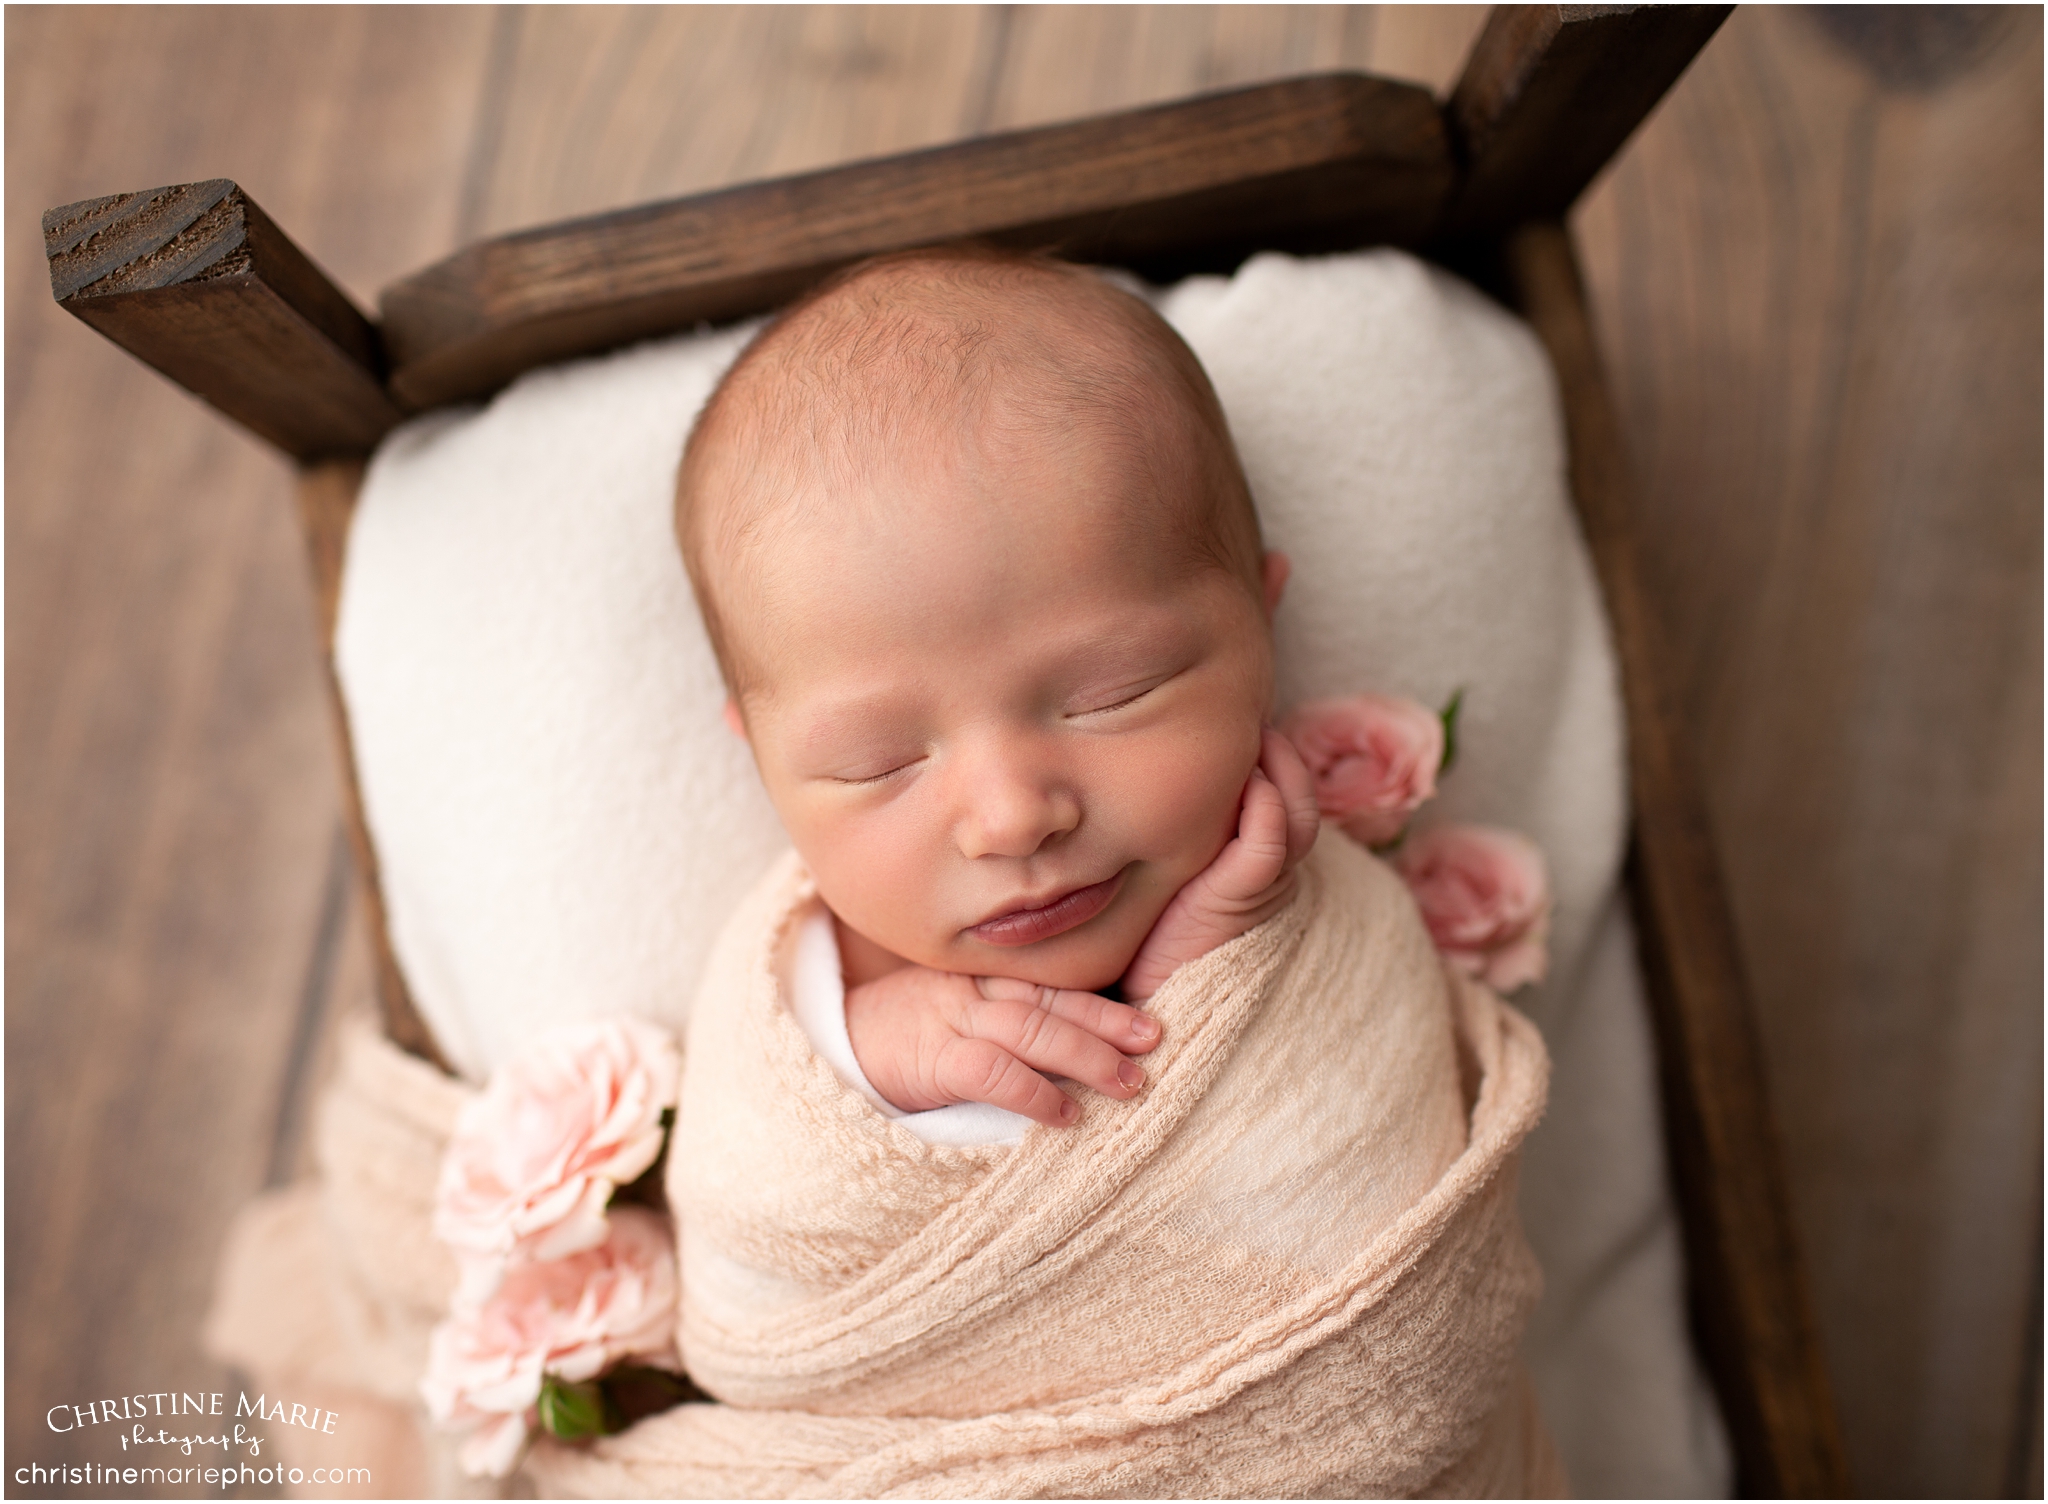 baby girl in wooden bed with flowers, christine marie photography